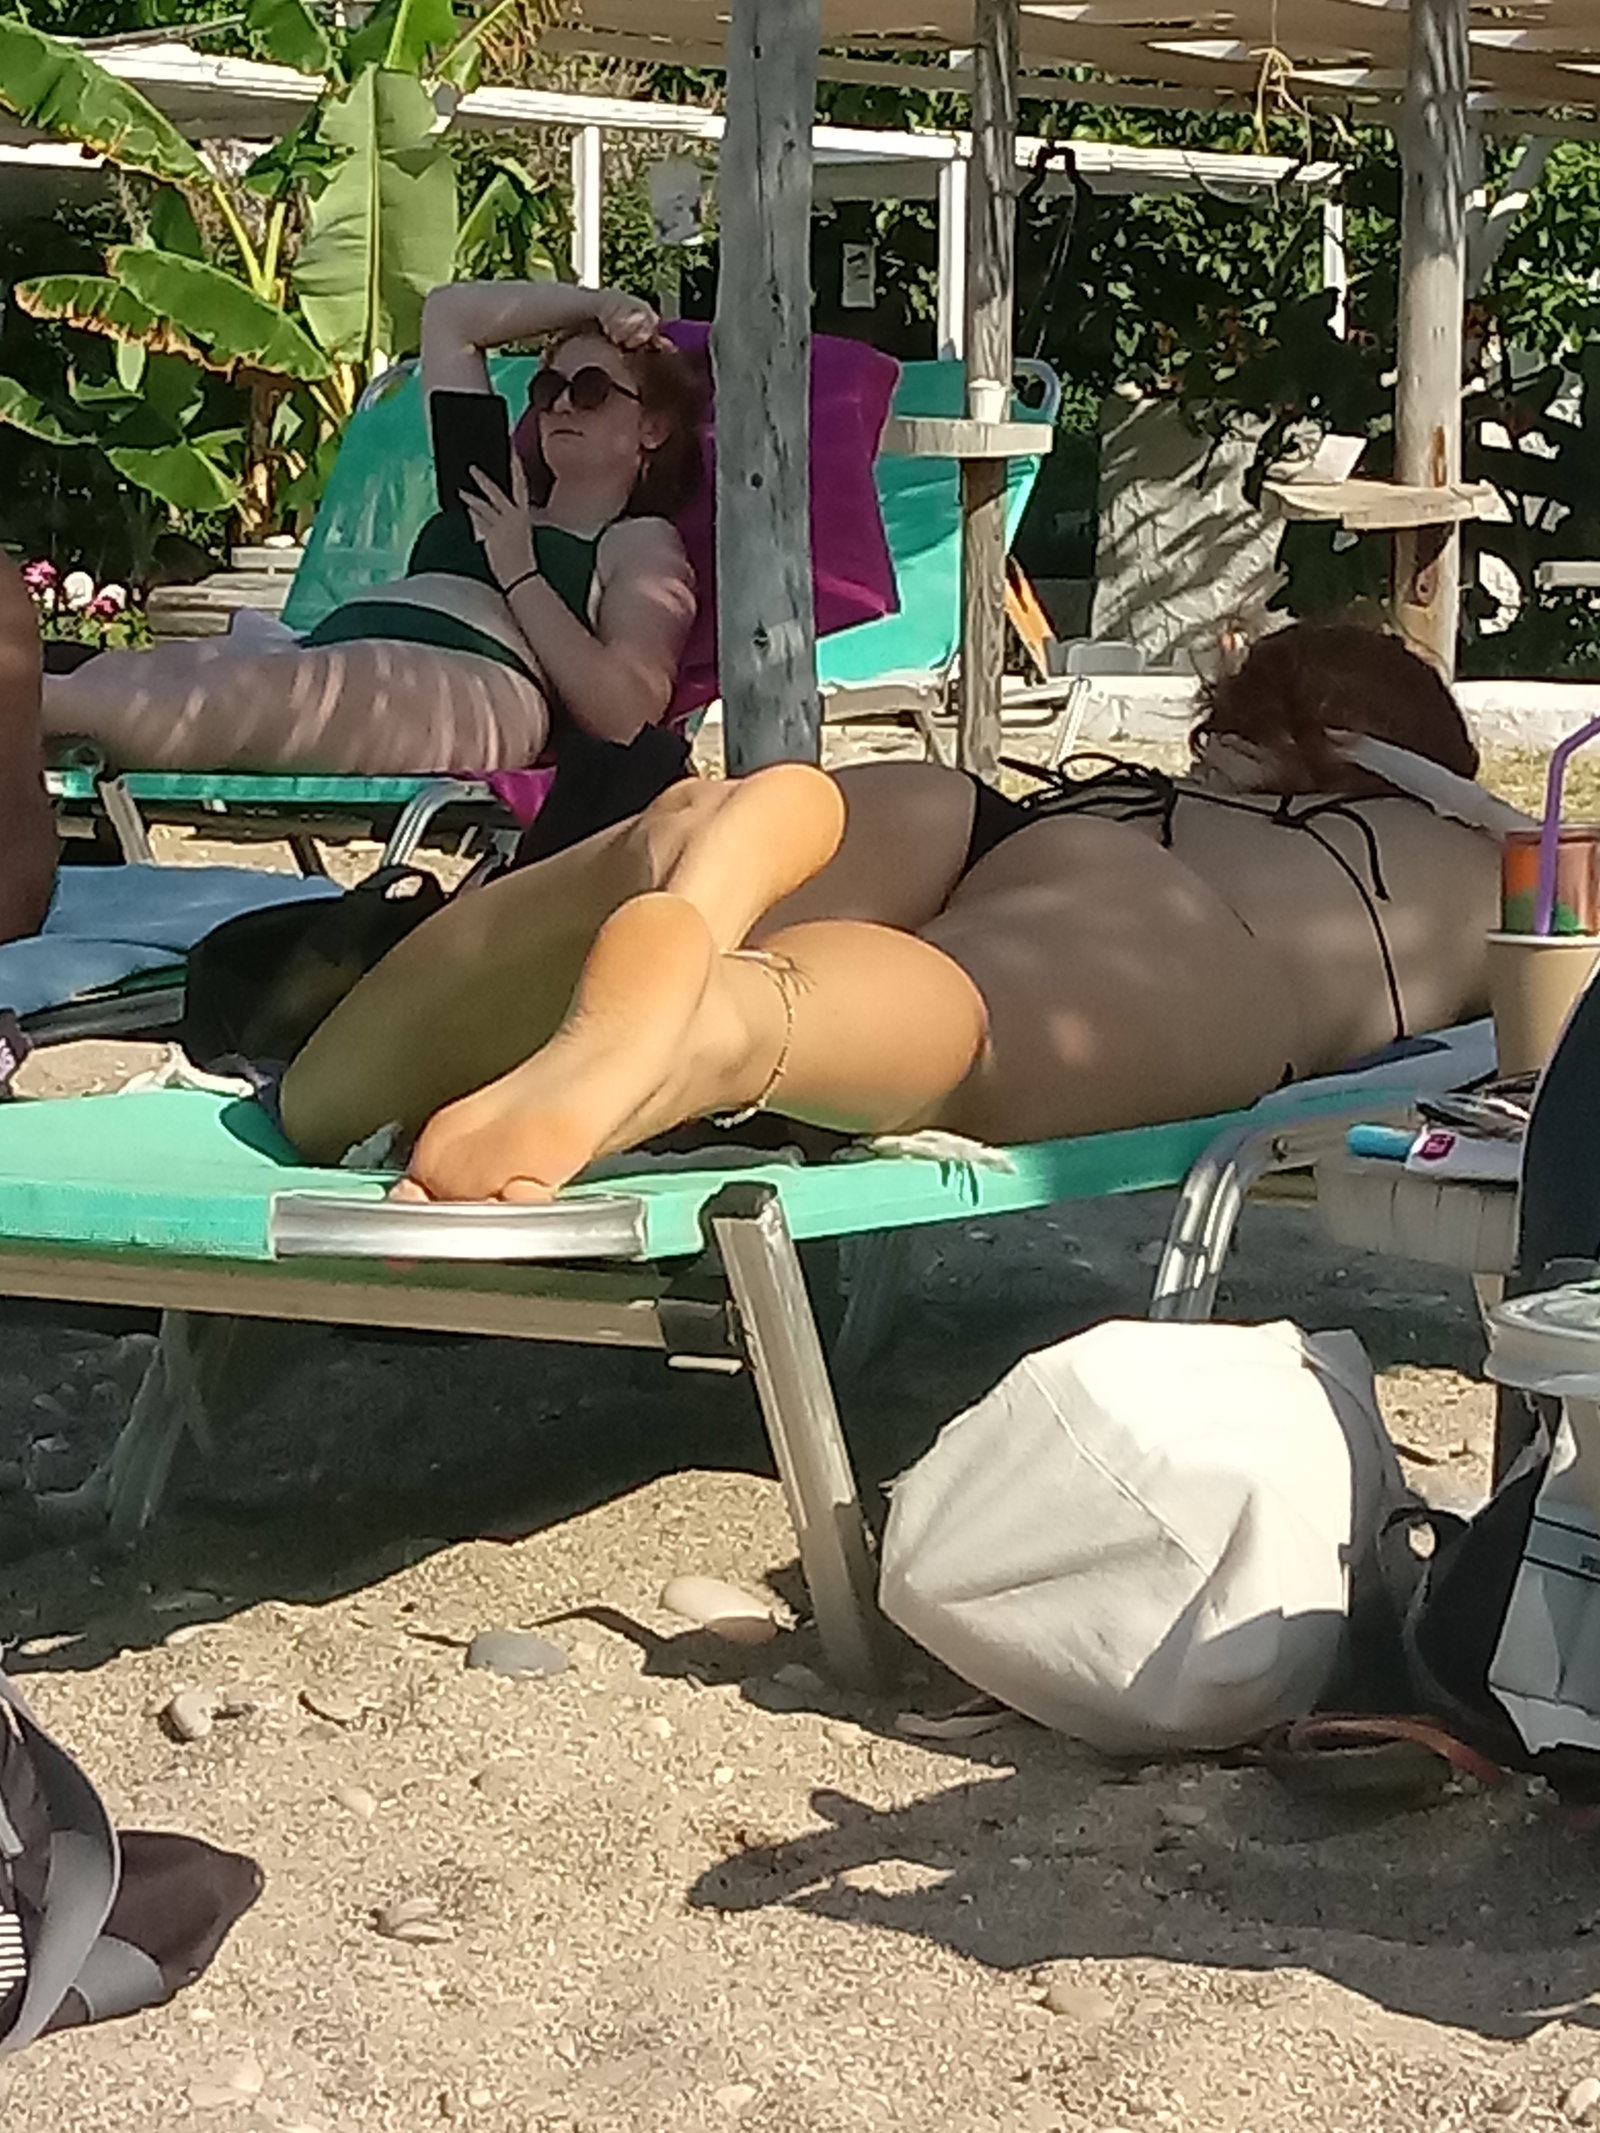 Photo by Blaze-It420 with the username @Blaze-It420,  August 1, 2020 at 4:20 PM. The post is about the topic Creepshots and the text says 'Some pics I snapped earlier today at the beach. Some are better quality than others, but I decided to post them anyway'